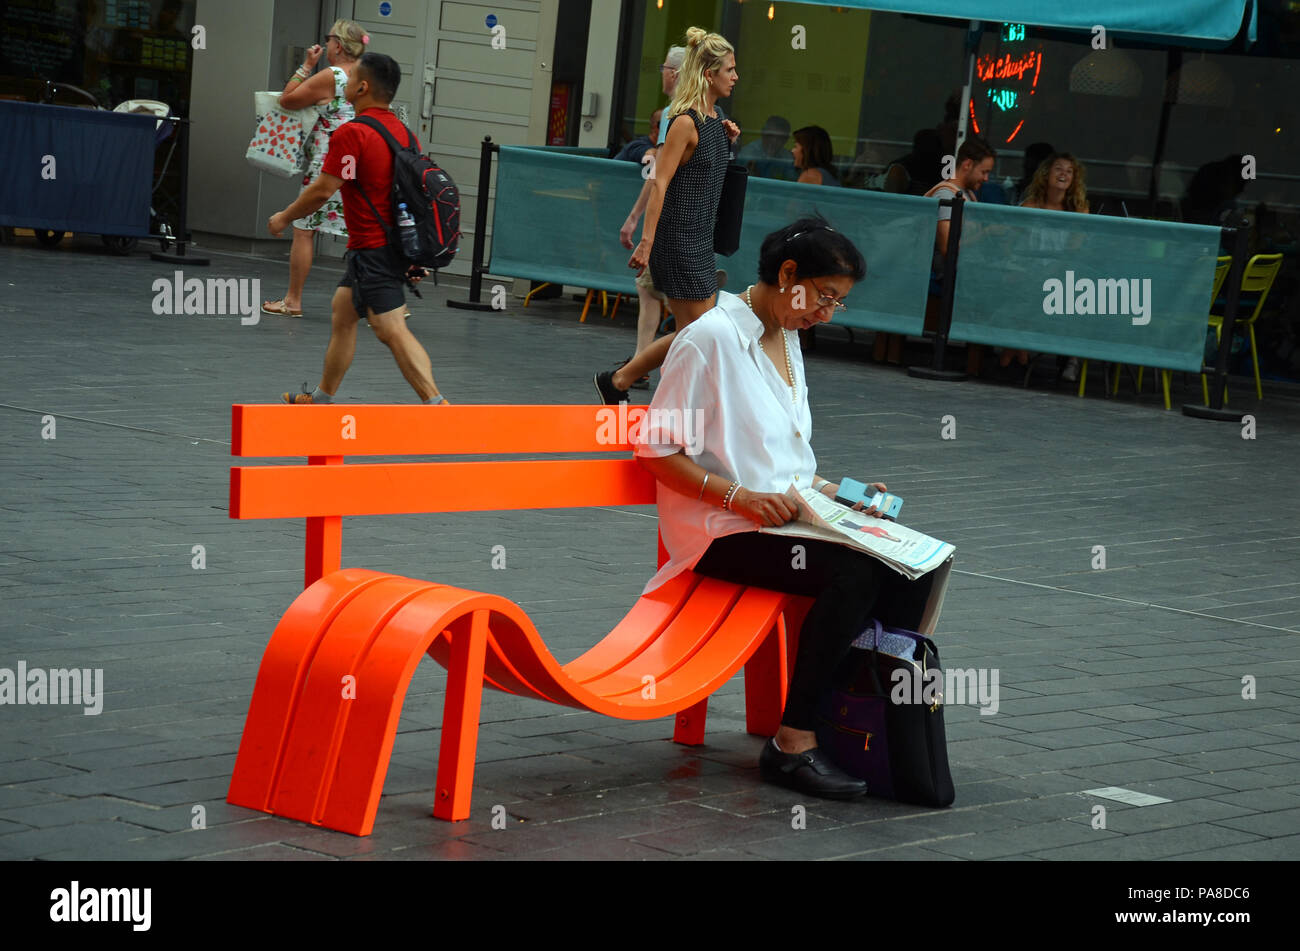 London, UK, 18 July 2018 Modified social benches, modern art by Danish artist Jeppe Hein outside the Royal Festival Hall on the South Bank of the Tham Stock Photo